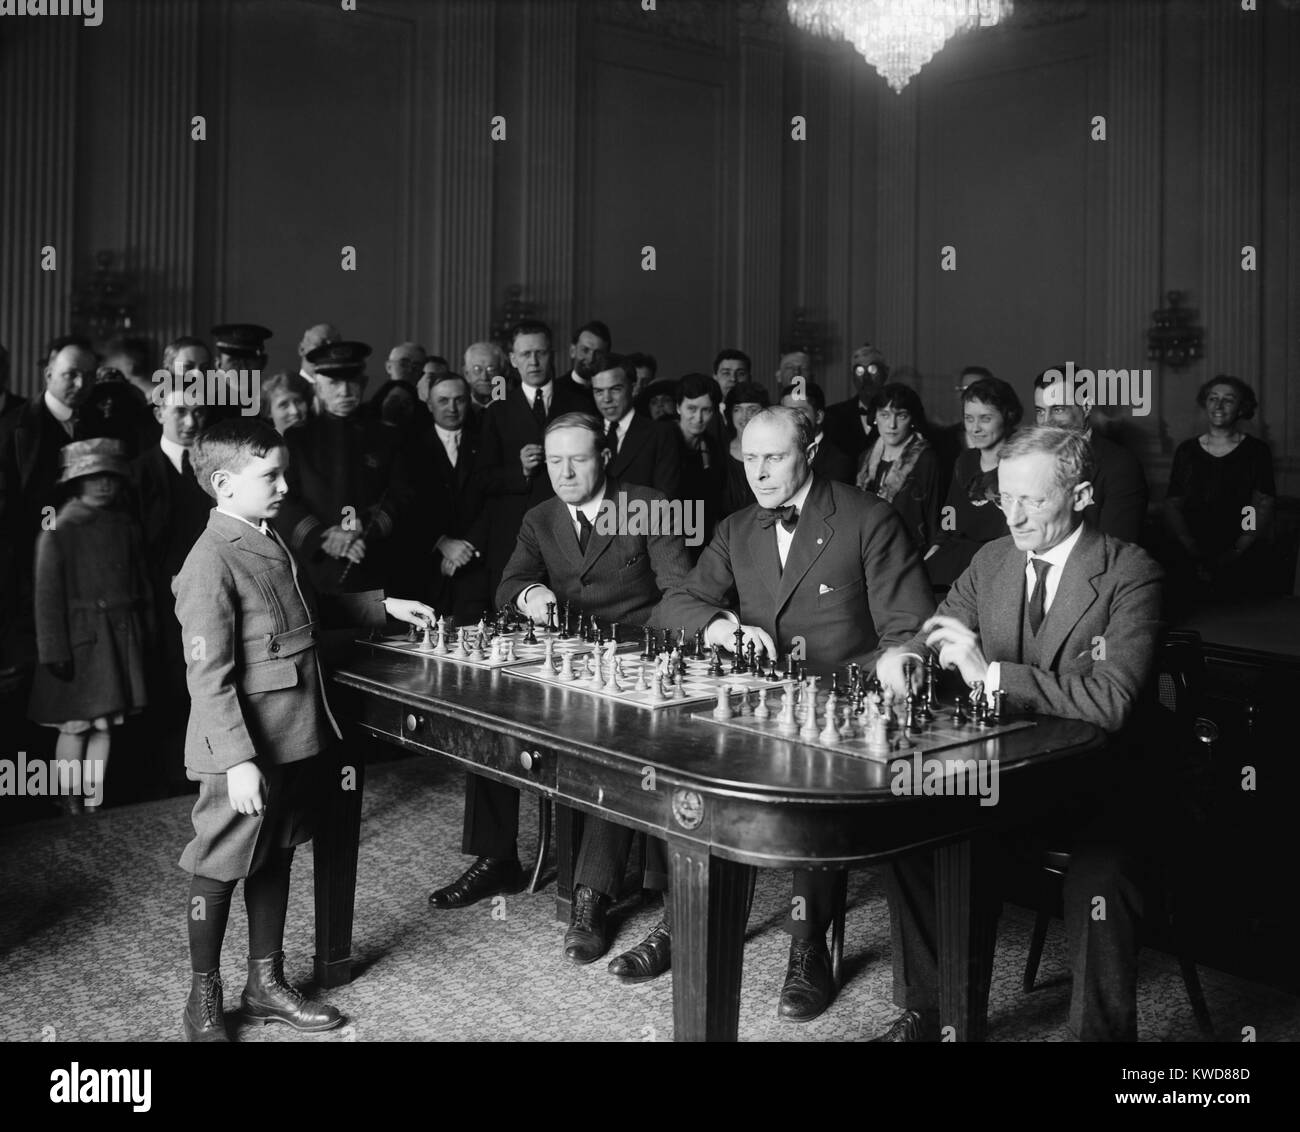 Chess prodigy, Samuel Herman Reshevsky, in a simultaneous chess exhibition match, April 6, 1922. The 10 year old was on an U.S. tour, where he won 1,491 of the 1,500 games he played against experts. (BSLOC 2015 17 162) Stock Photo